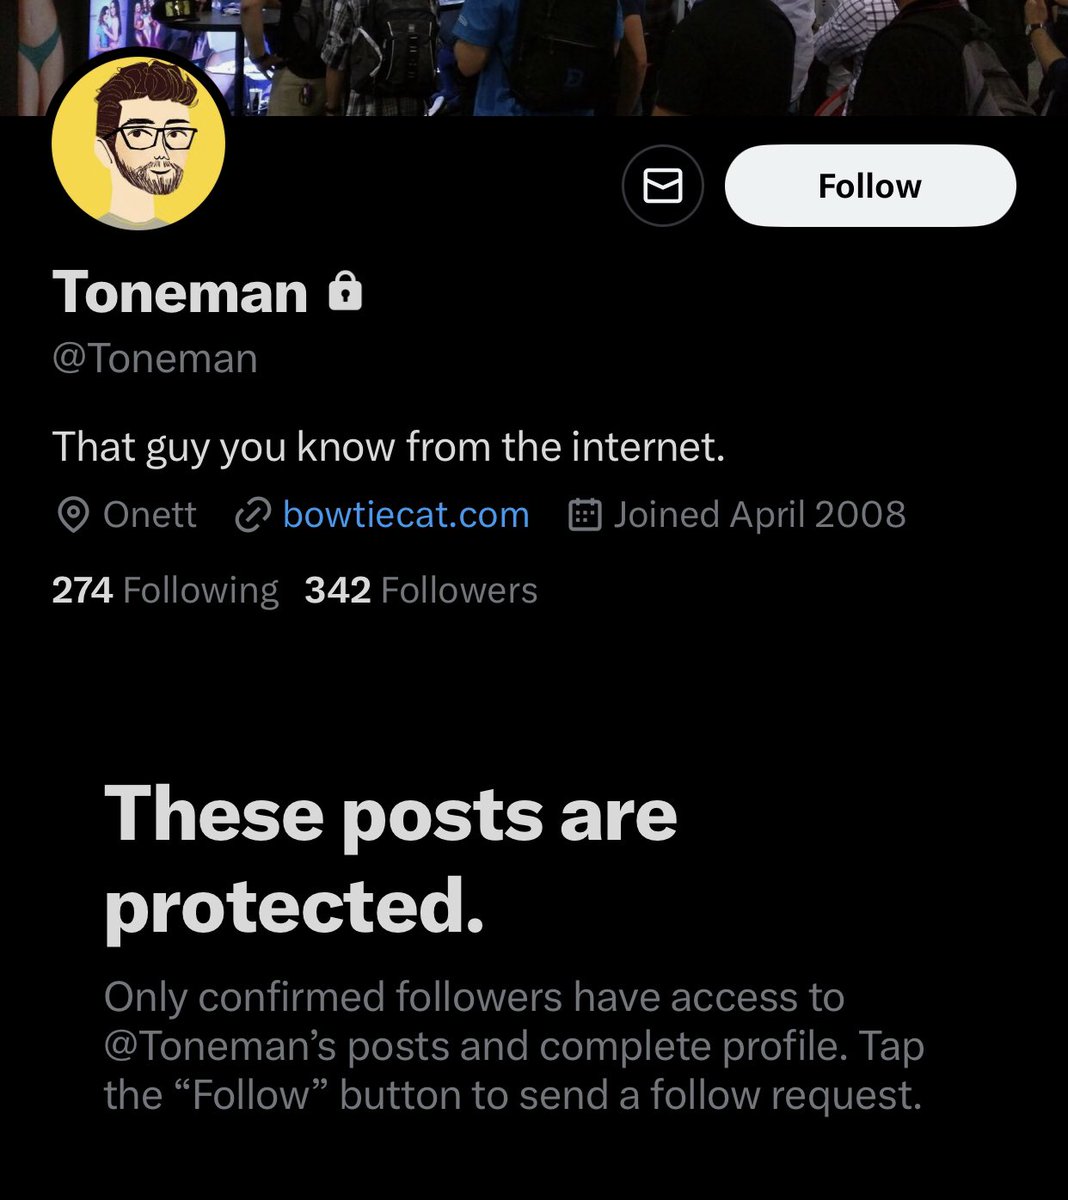 >Makes an ACTUAL CALL FOR DEATH

>Tried to make a joke out of it by saying “anyway check out my soundcloud”

>Then deletes the post and privates his account

Reap what you sow @Toneman